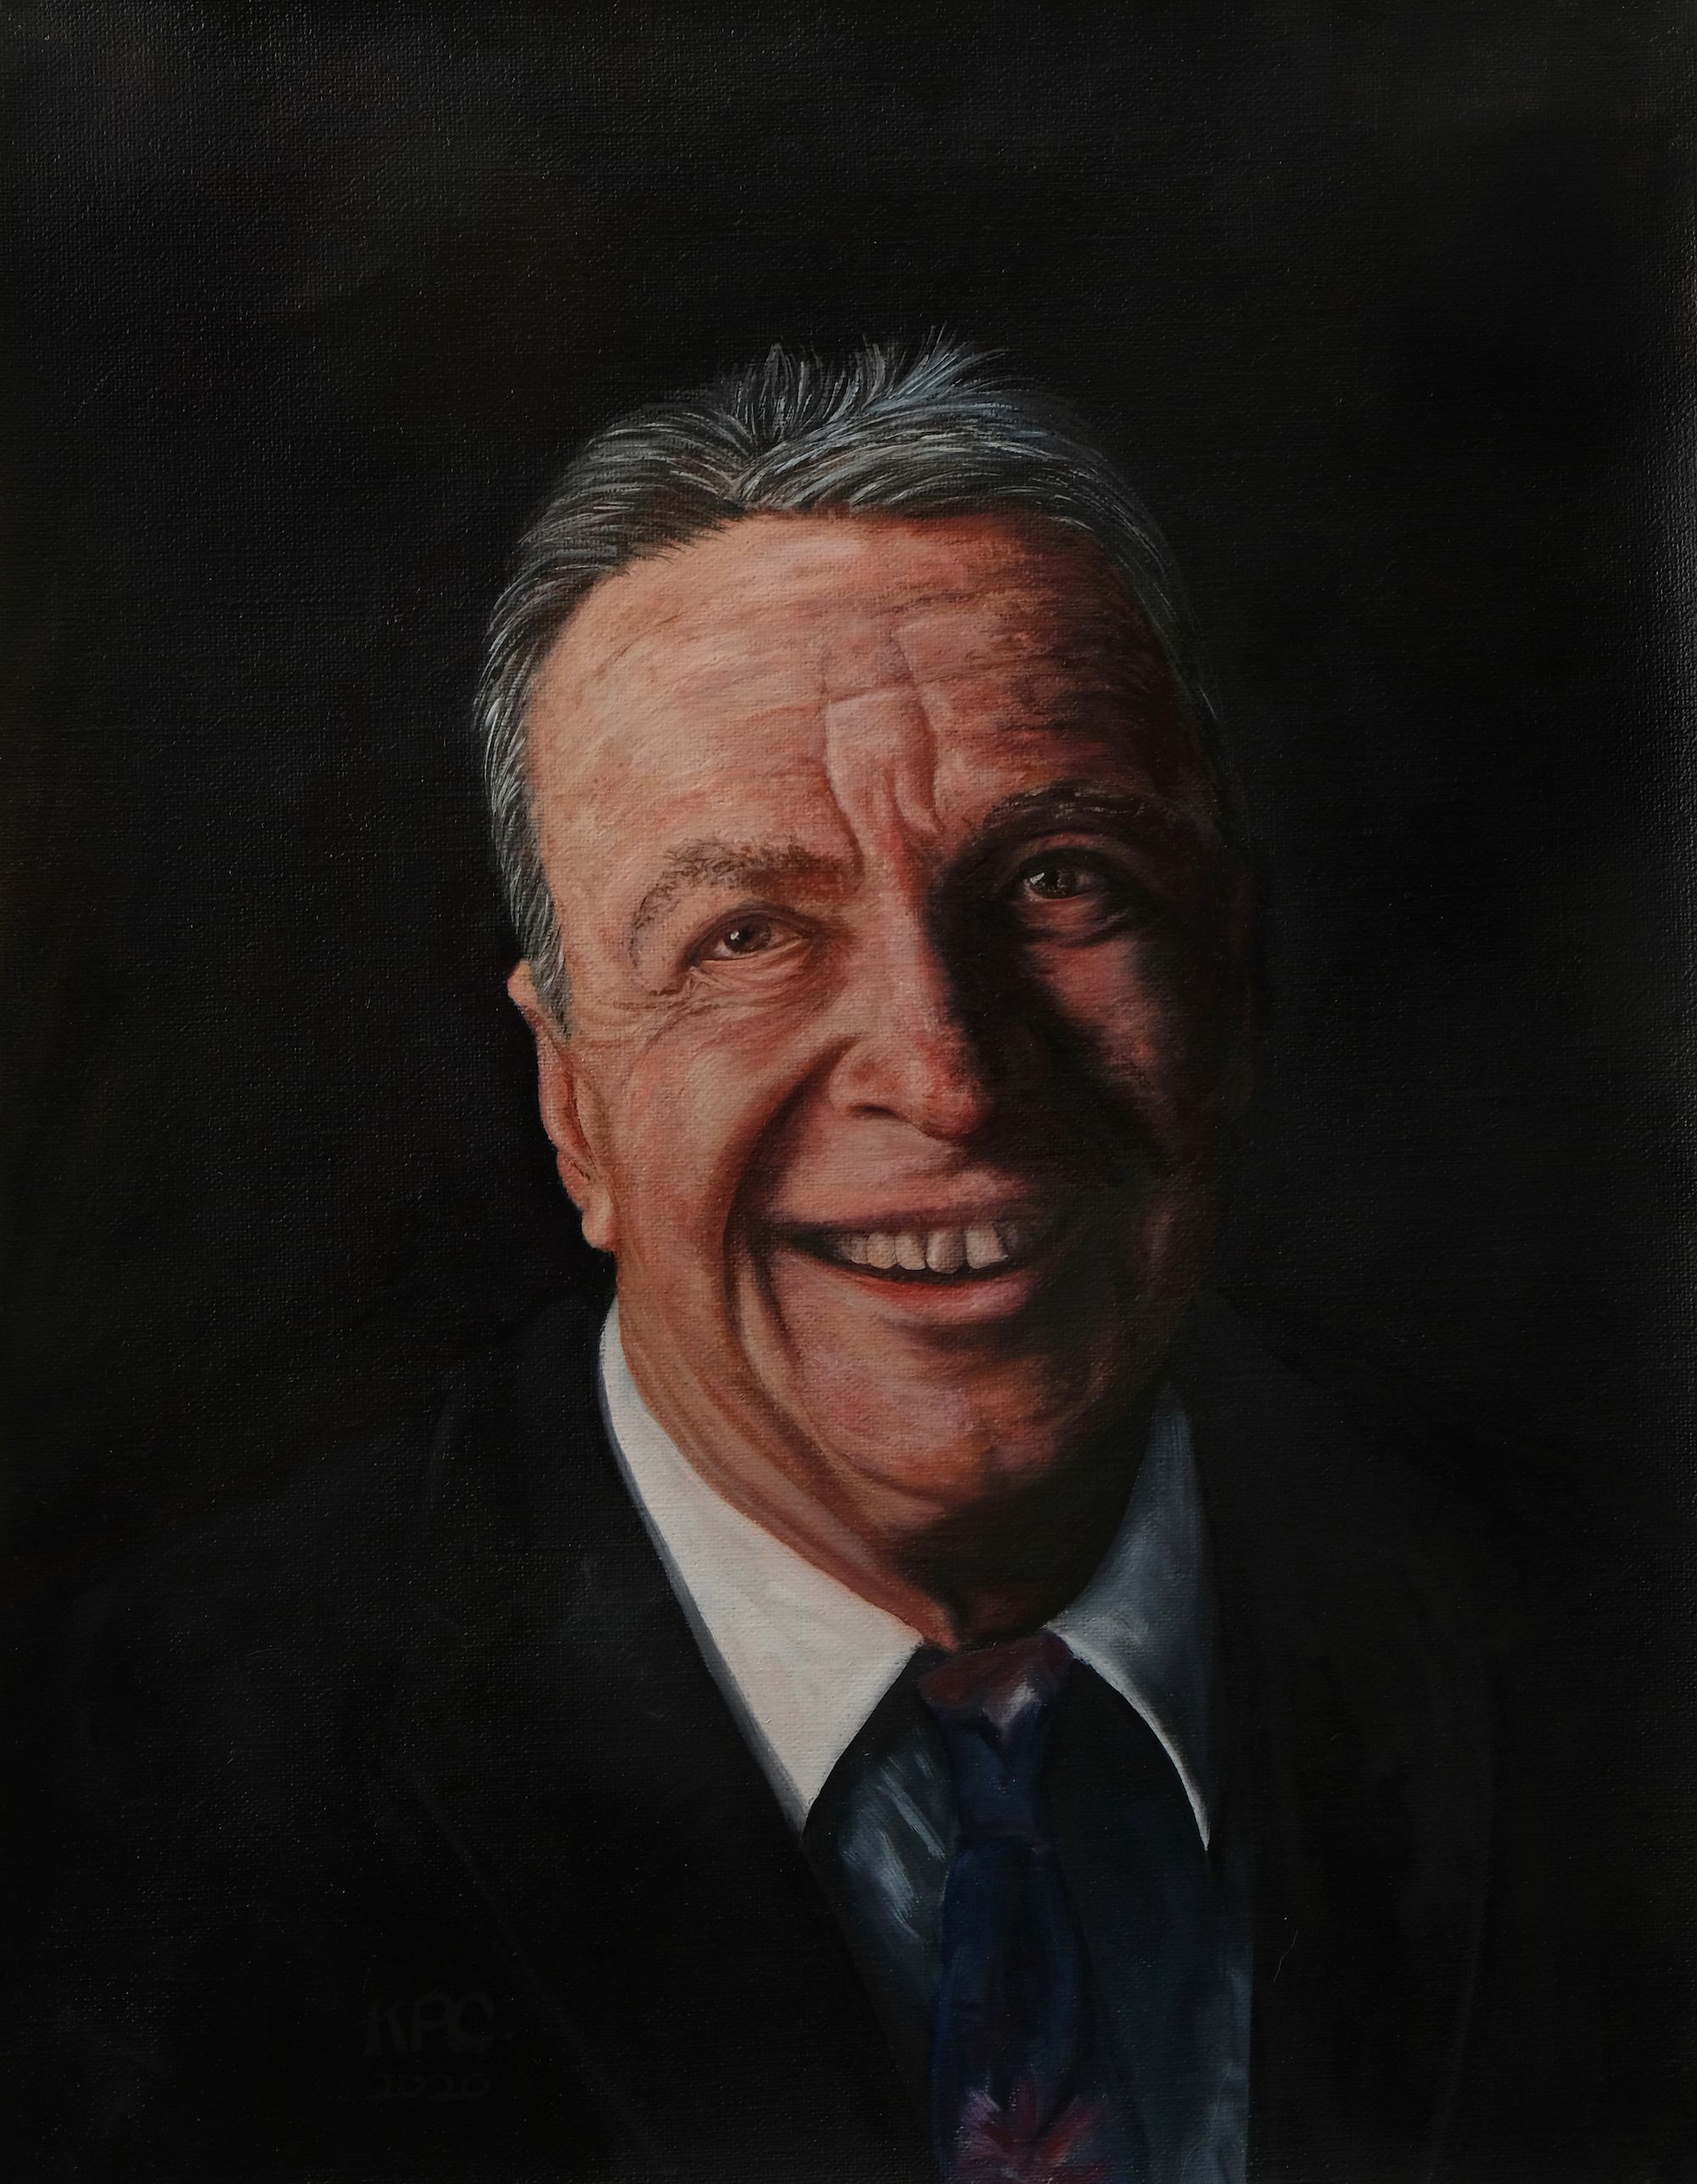 A painting of a man looking straight at the viewer smiling wearing a jacket, collard shirt and tie. 